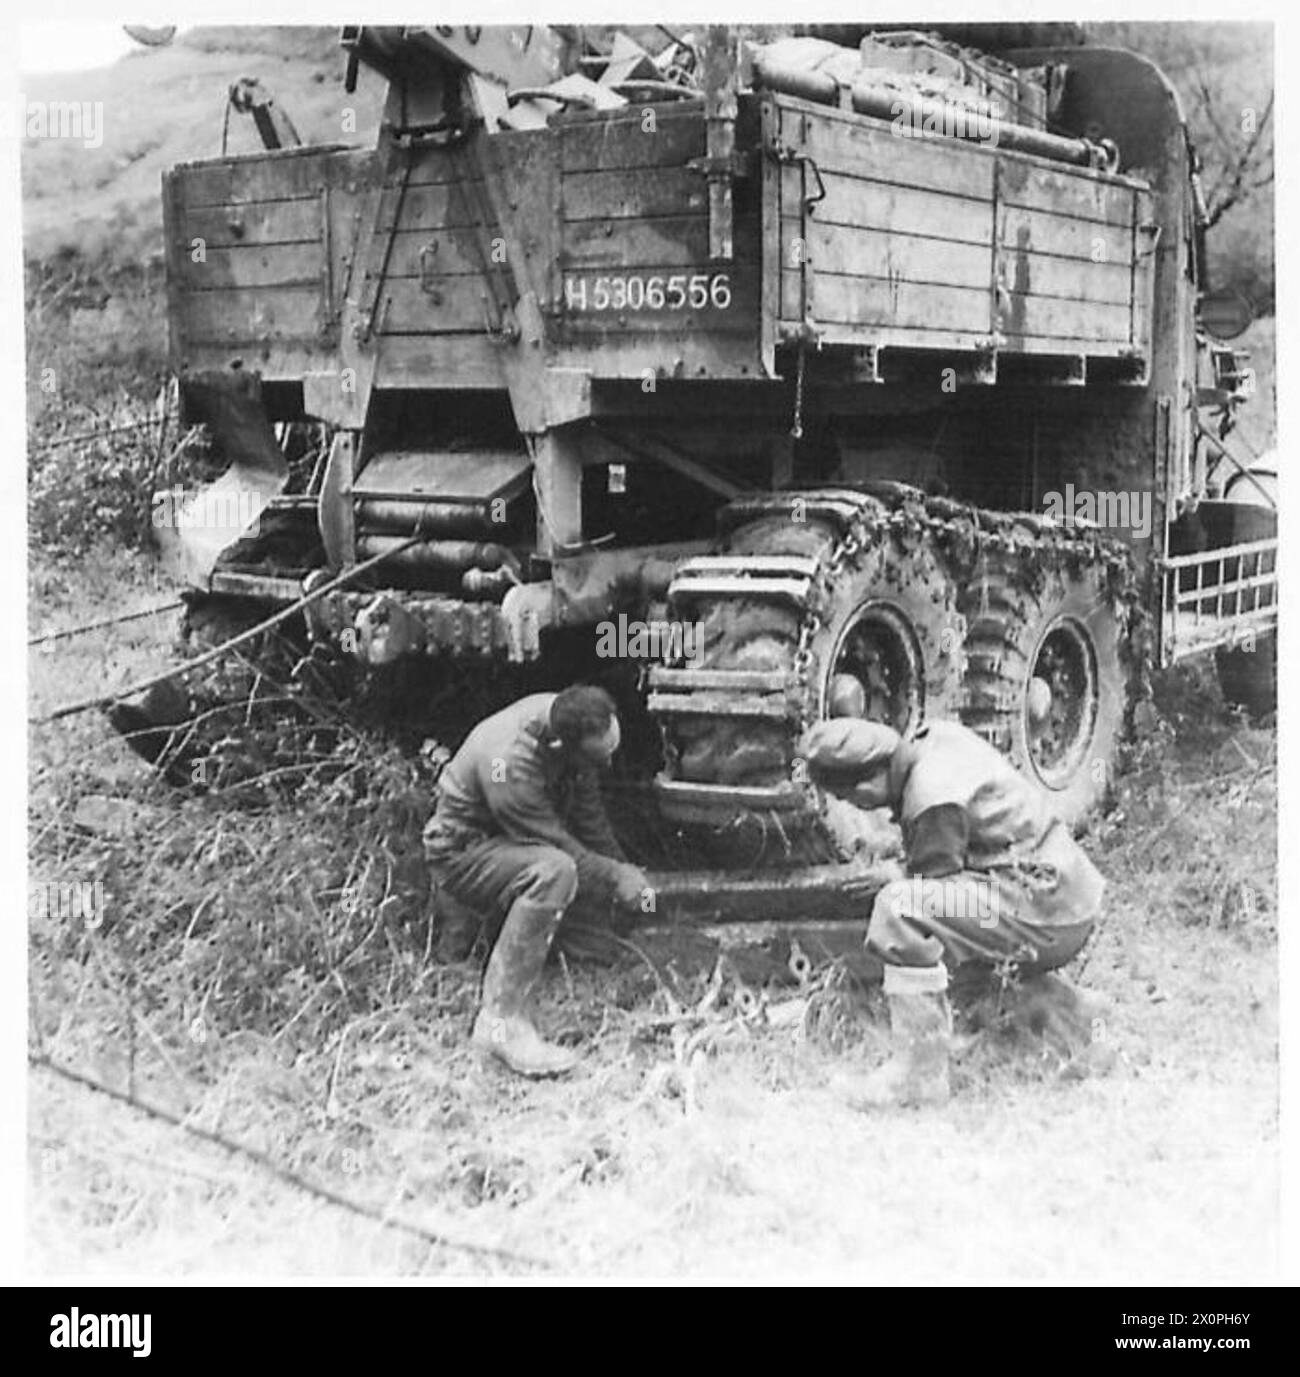 FIFTH ARMY : A NEW PROBLEM OF RECOVERY - Cfn. I. Rowam of Ardrishaie, Argyllshire, and Cfn. S. Shrimpton of Bletchley, Bucks, block the wheels of a Scammell recovery vehicle to prevent it from slipping in the mud. Photographic negative , British Army Stock Photo